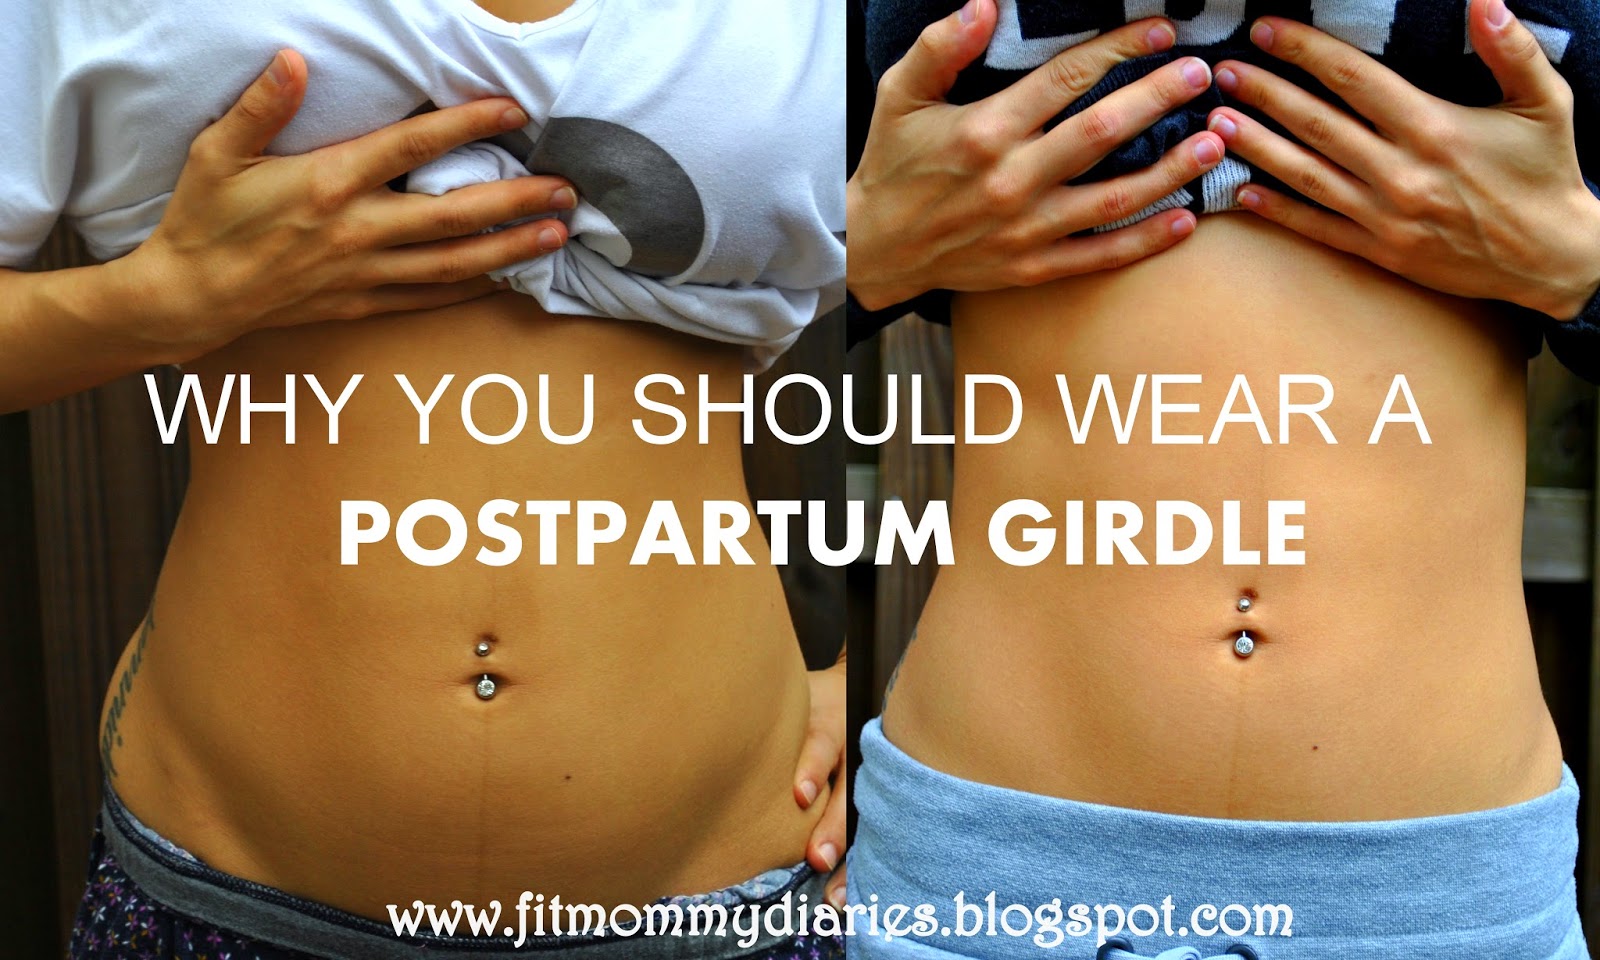 Diary of a Fit Mommy: Why You Should Use a Postpartum Girdle After Delivery